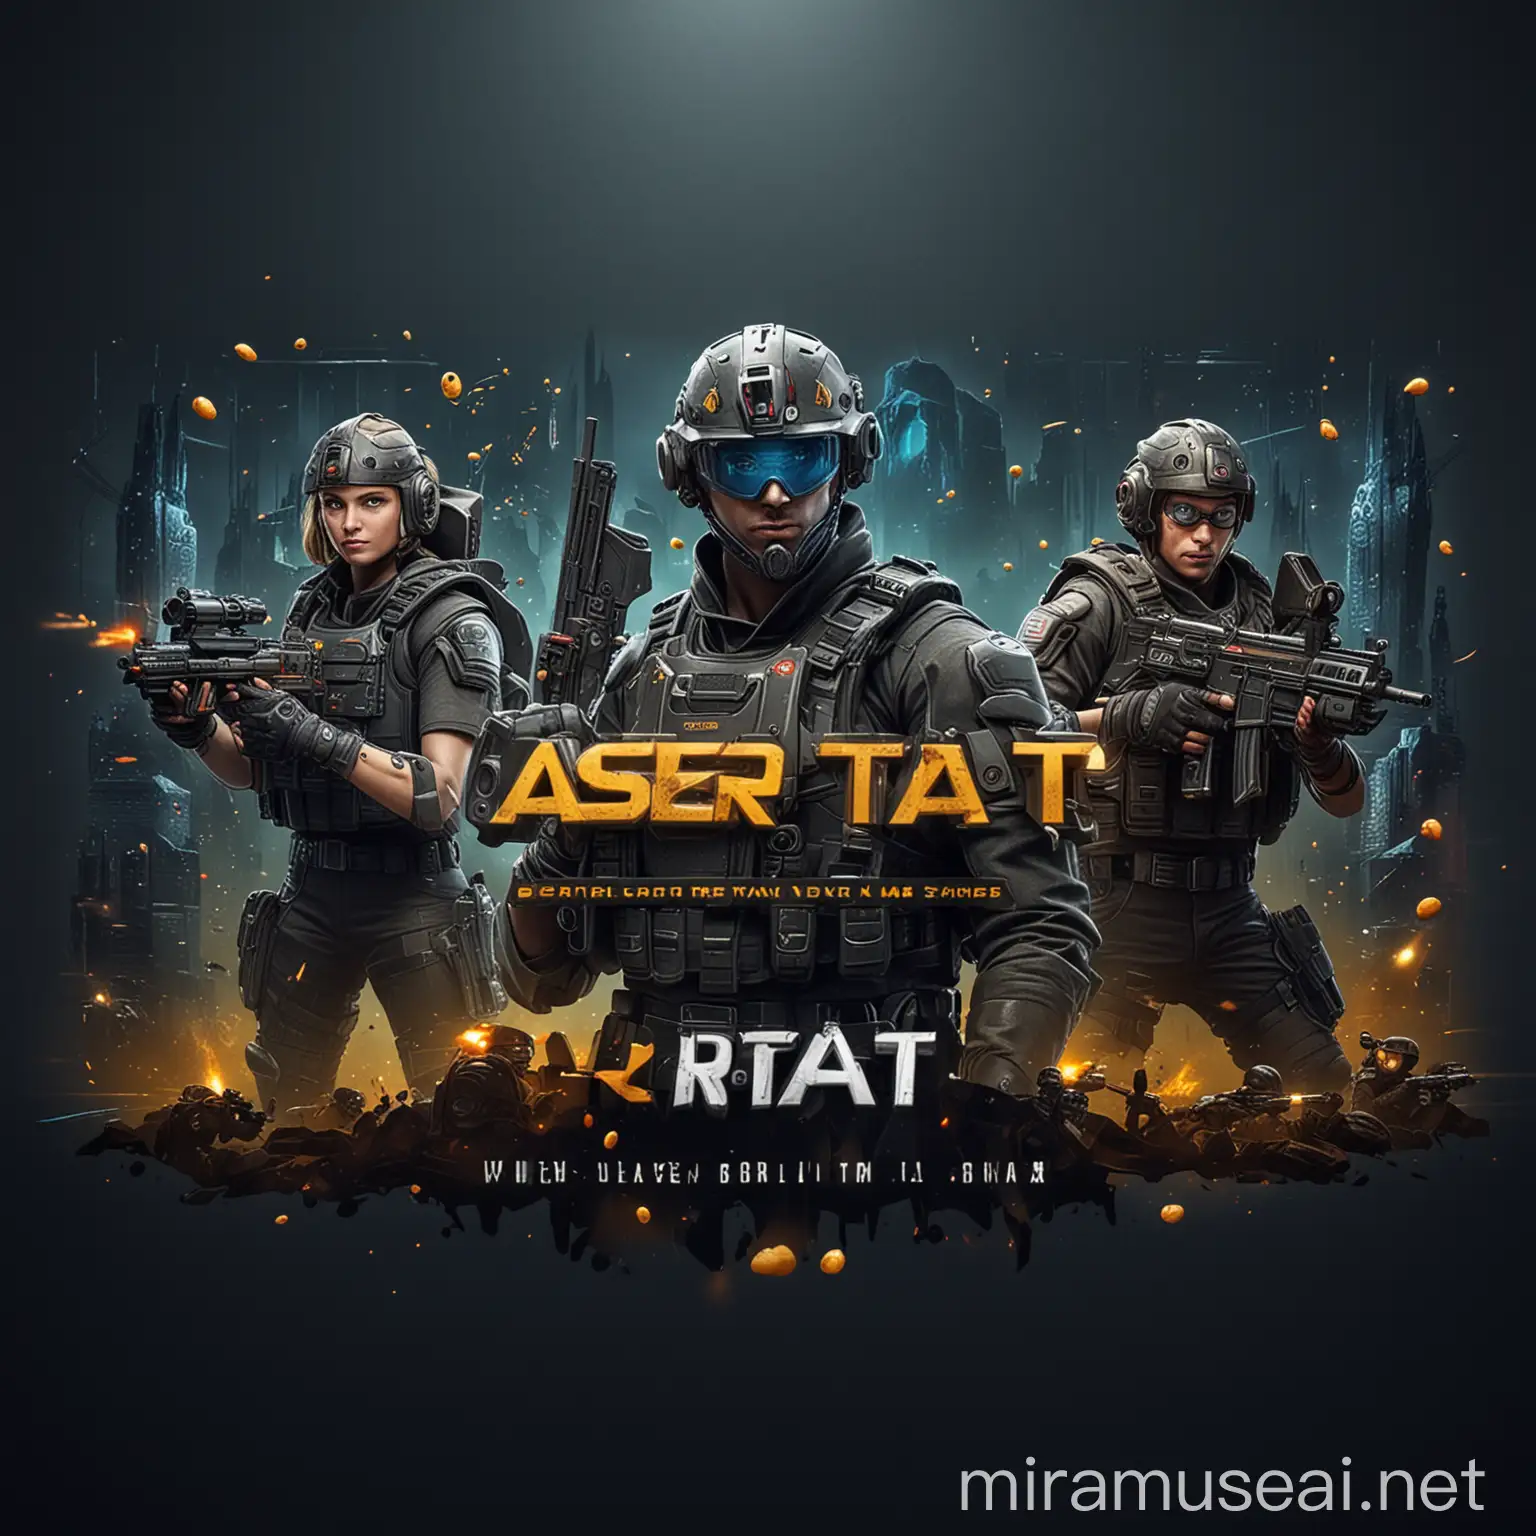 Professional website for lasertag games, ui, ix, ui/ux, website, landing page, high quality graphics, 3d